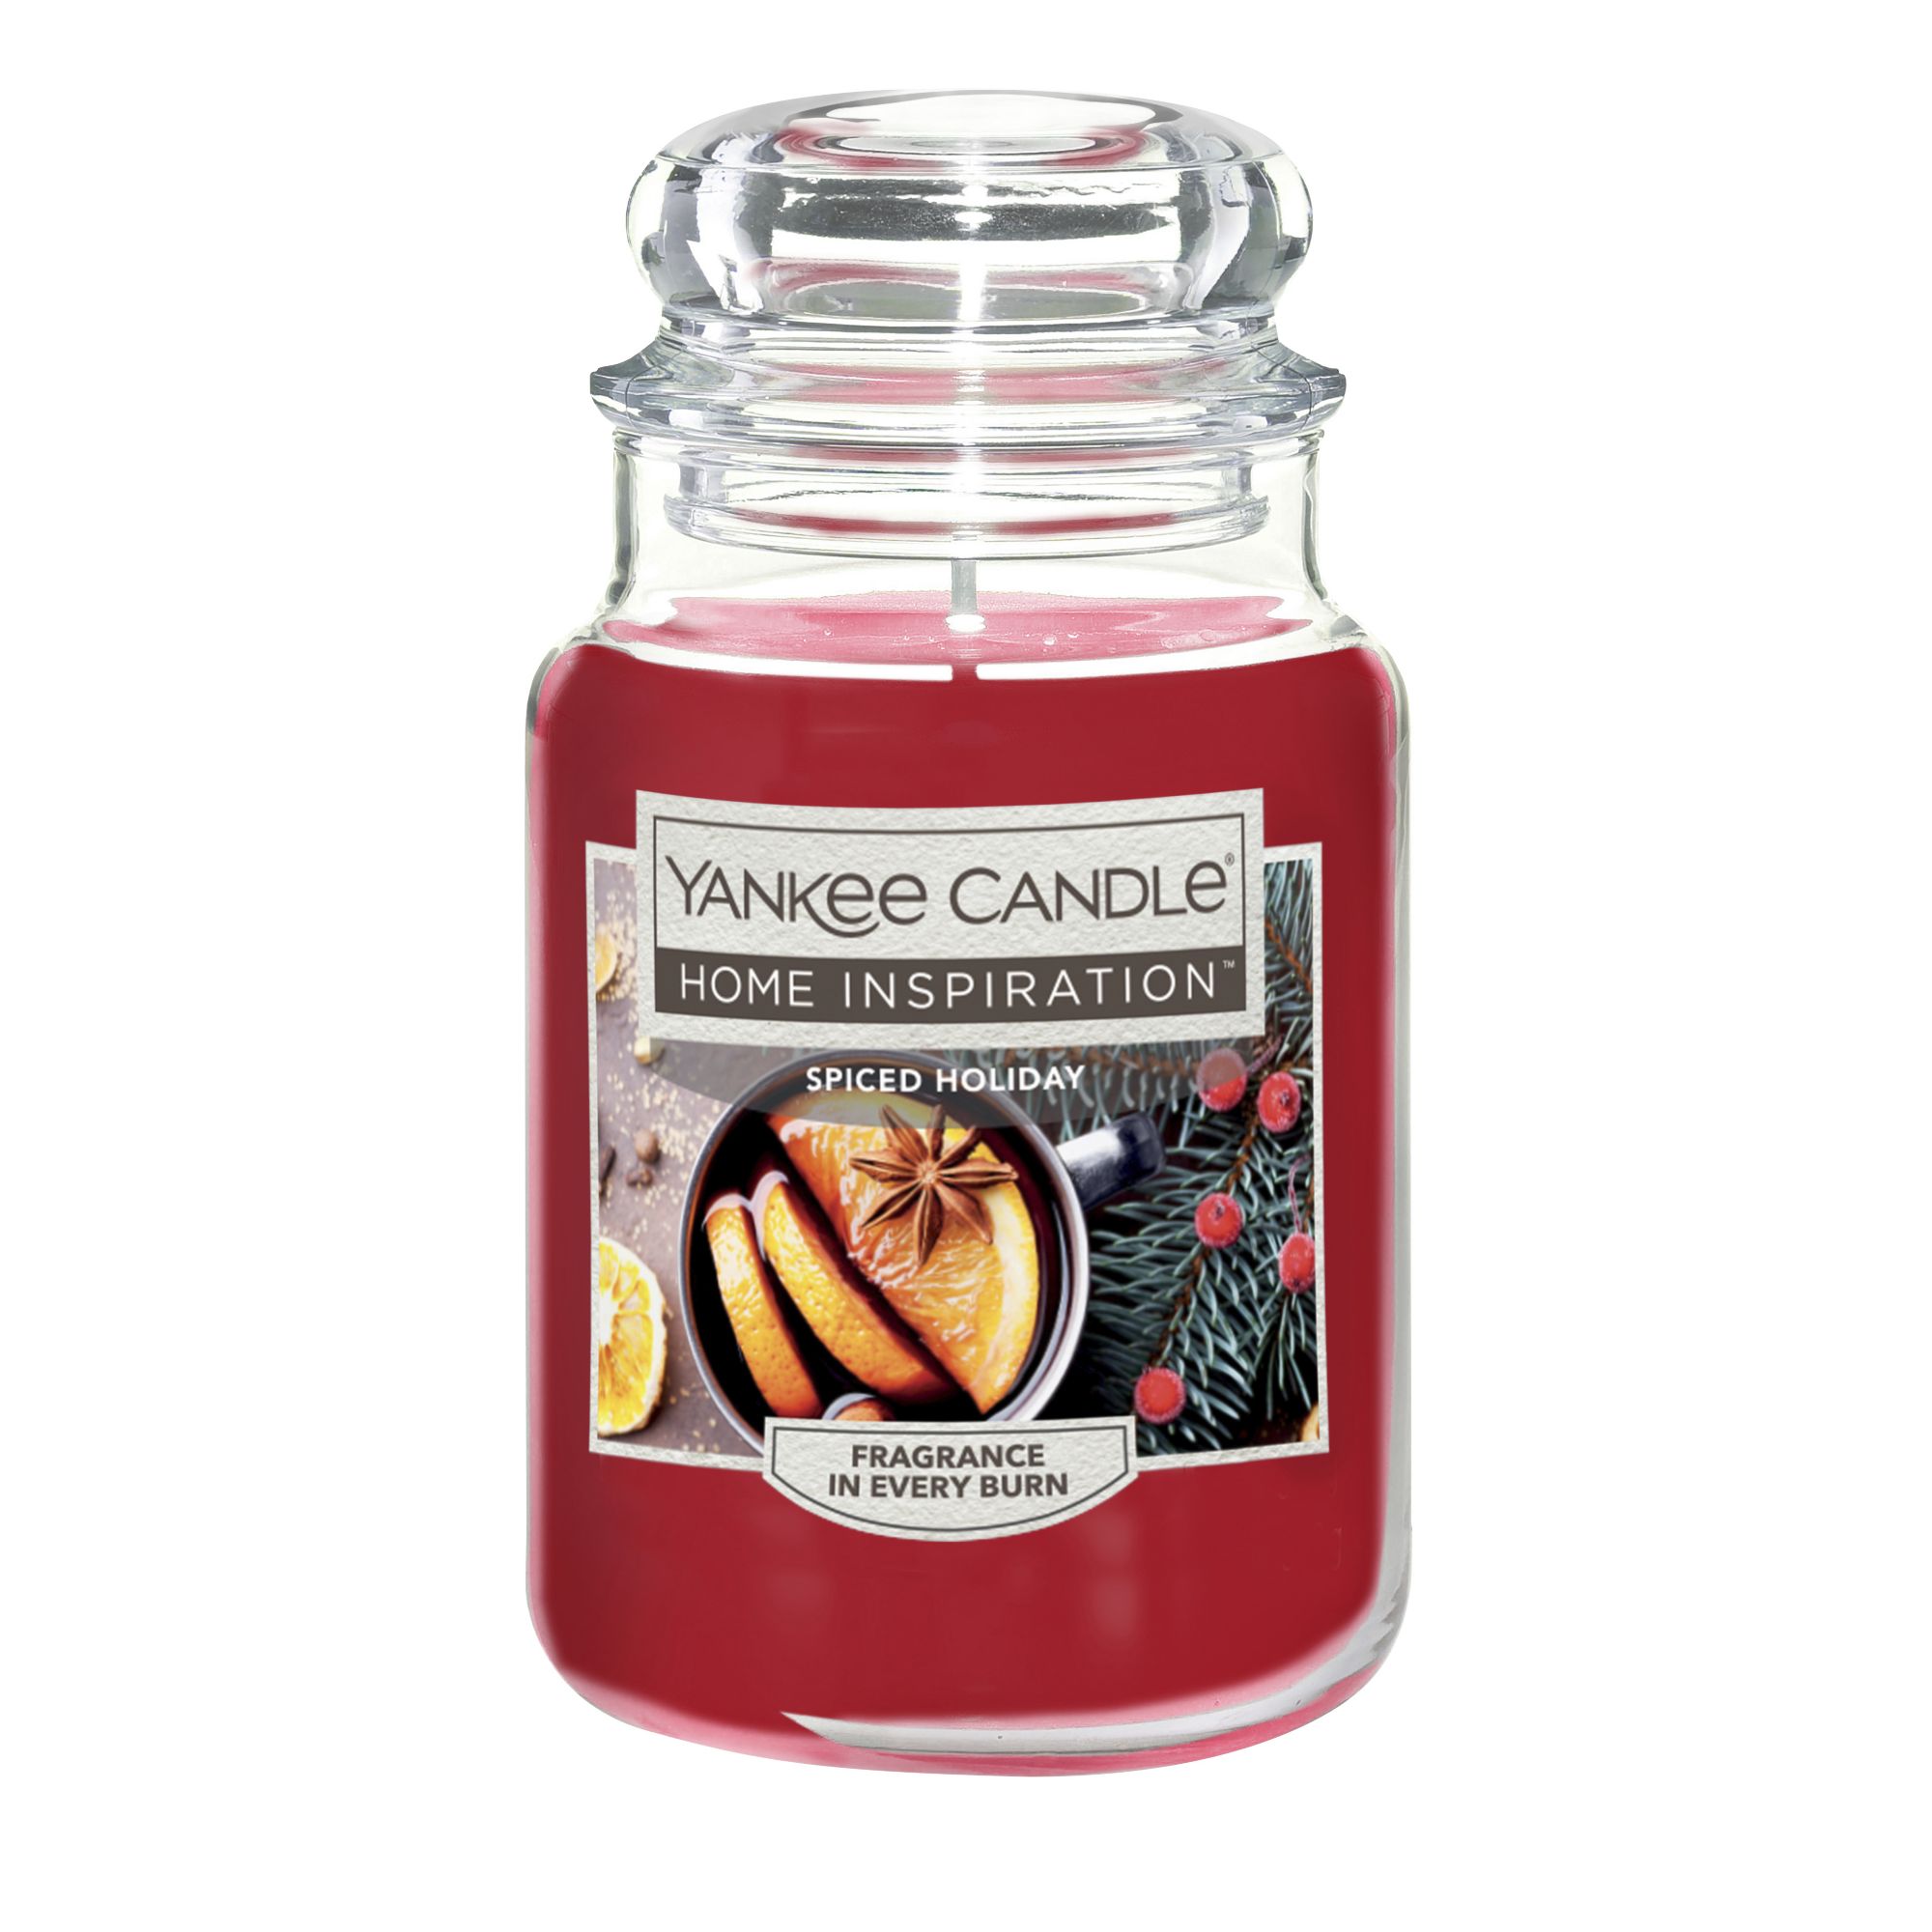 Yankee Candle Home Inspirations Candle, Spiced Holiday